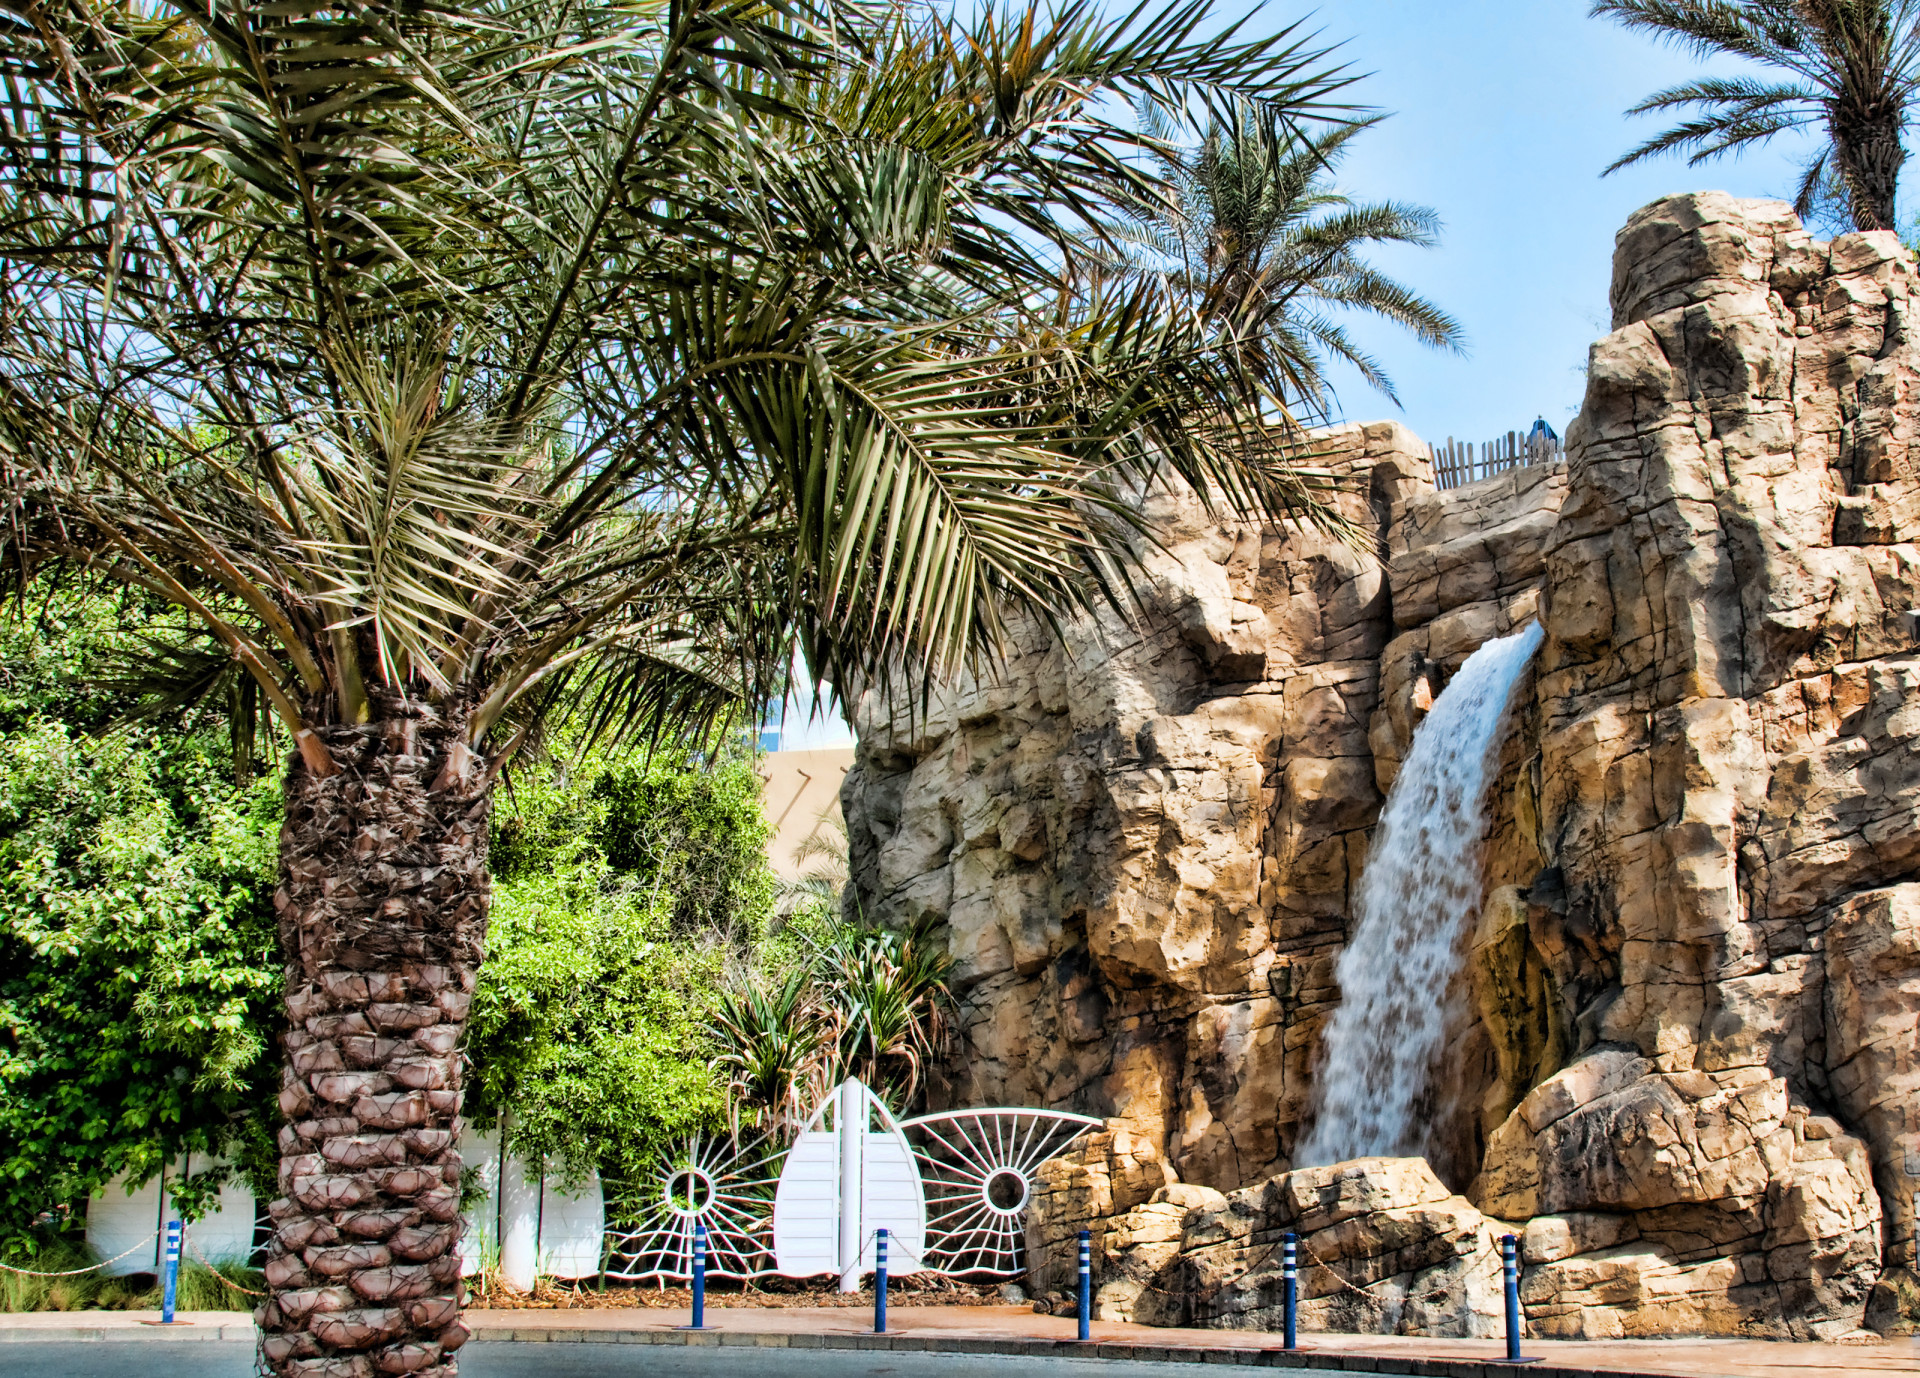 Also in Dubai, the Wild Wadi Water Park has an artificial waterfall that is almost 20 meters high.